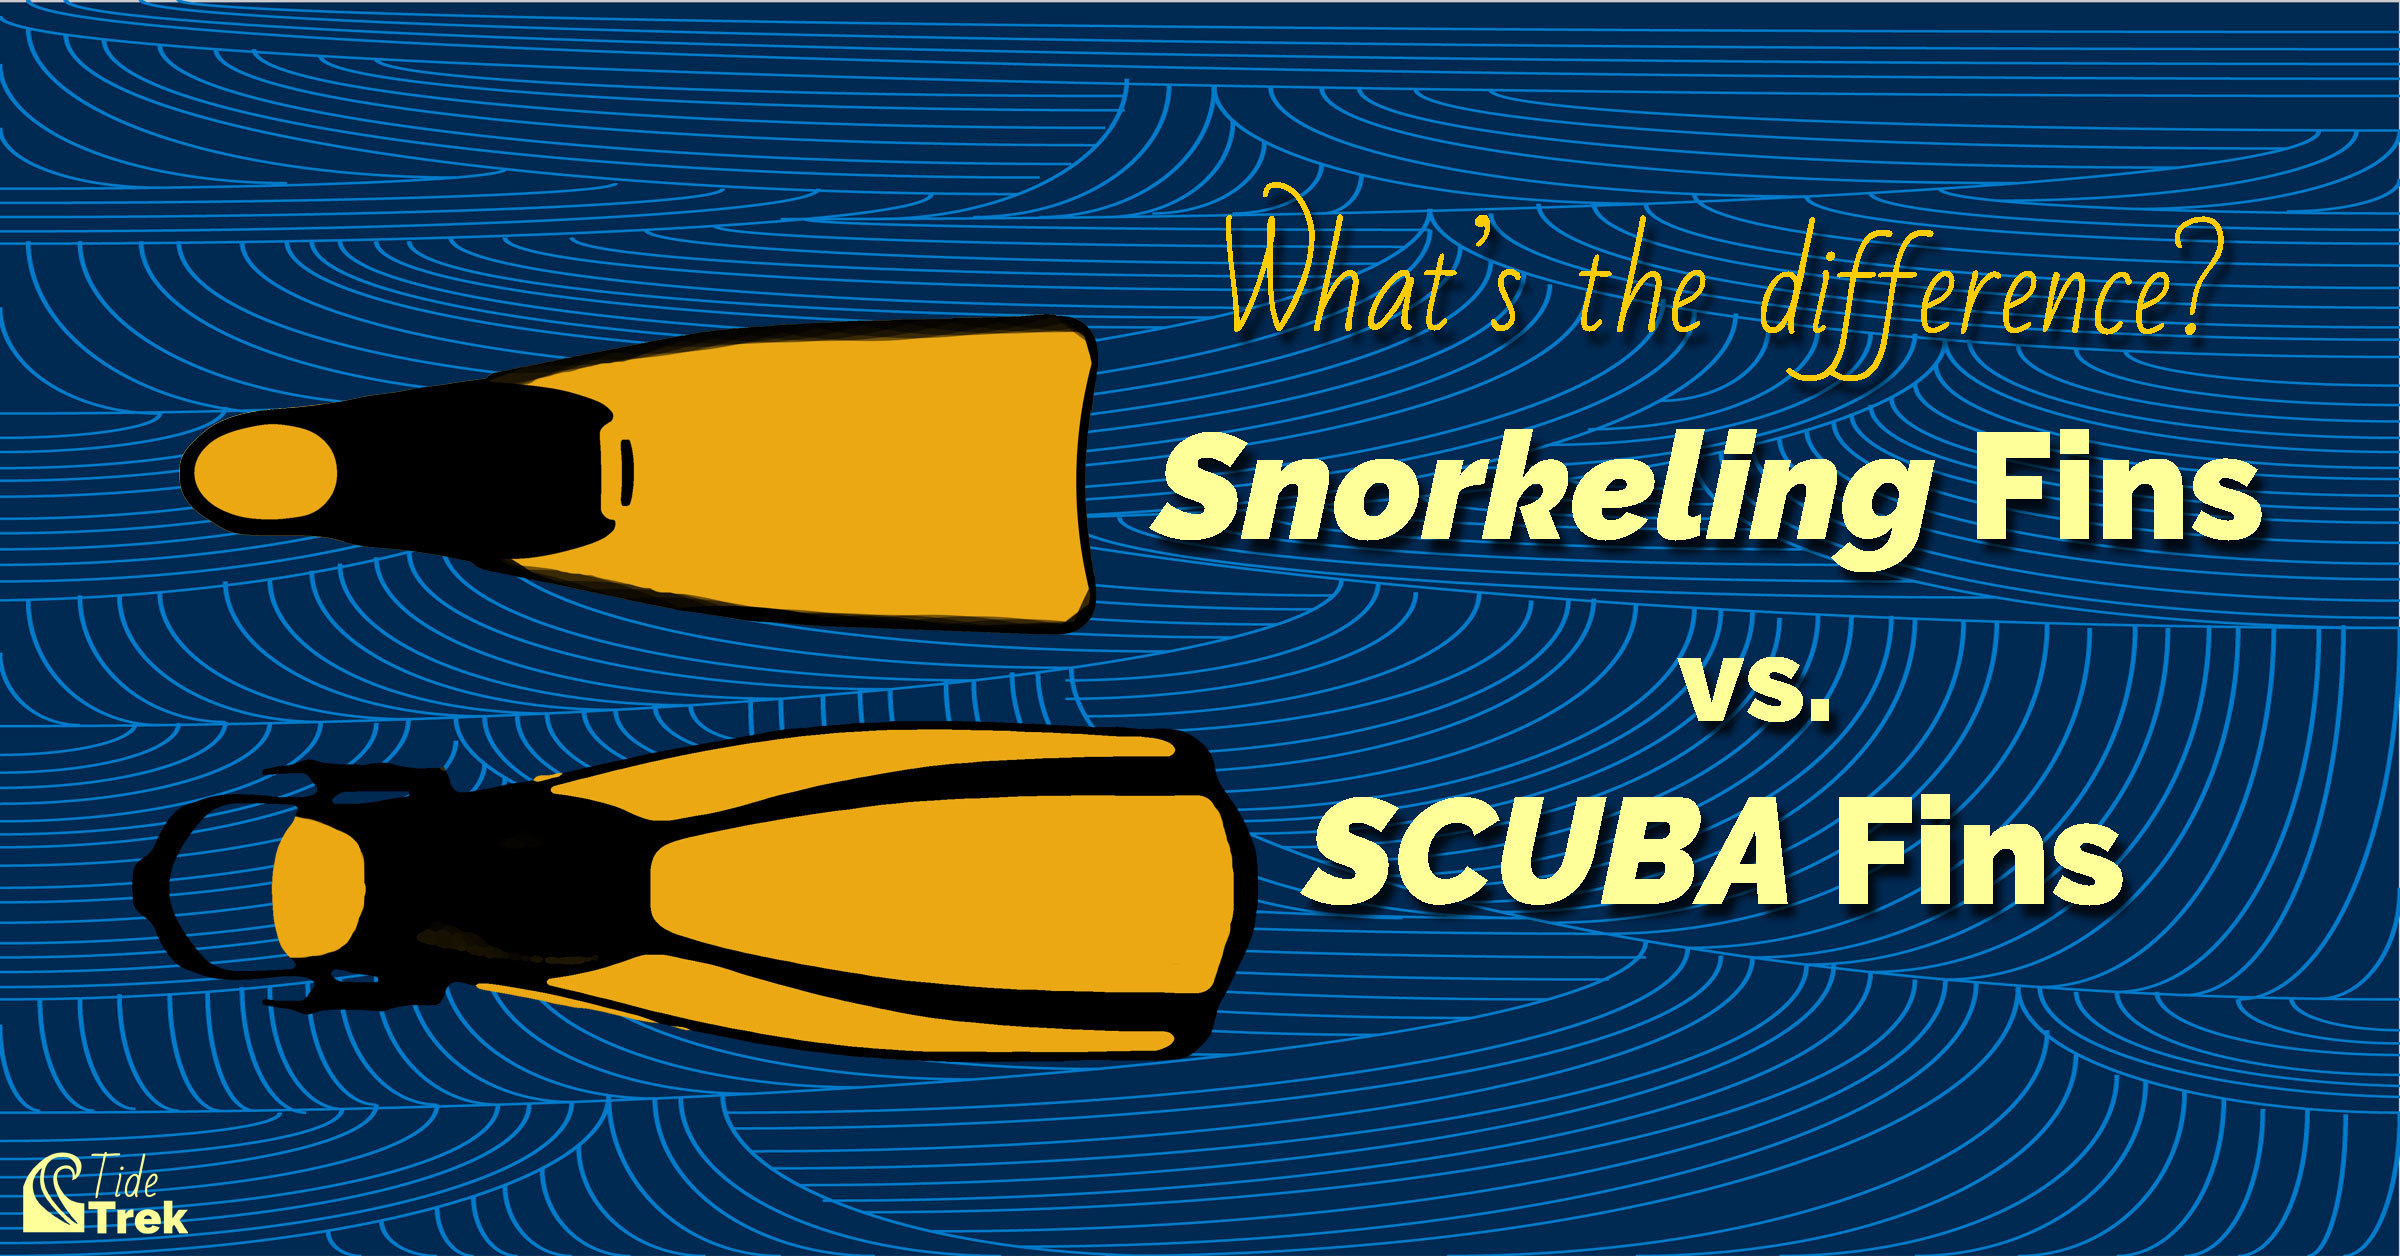 What's the difference between snorkeling and scuba fins?